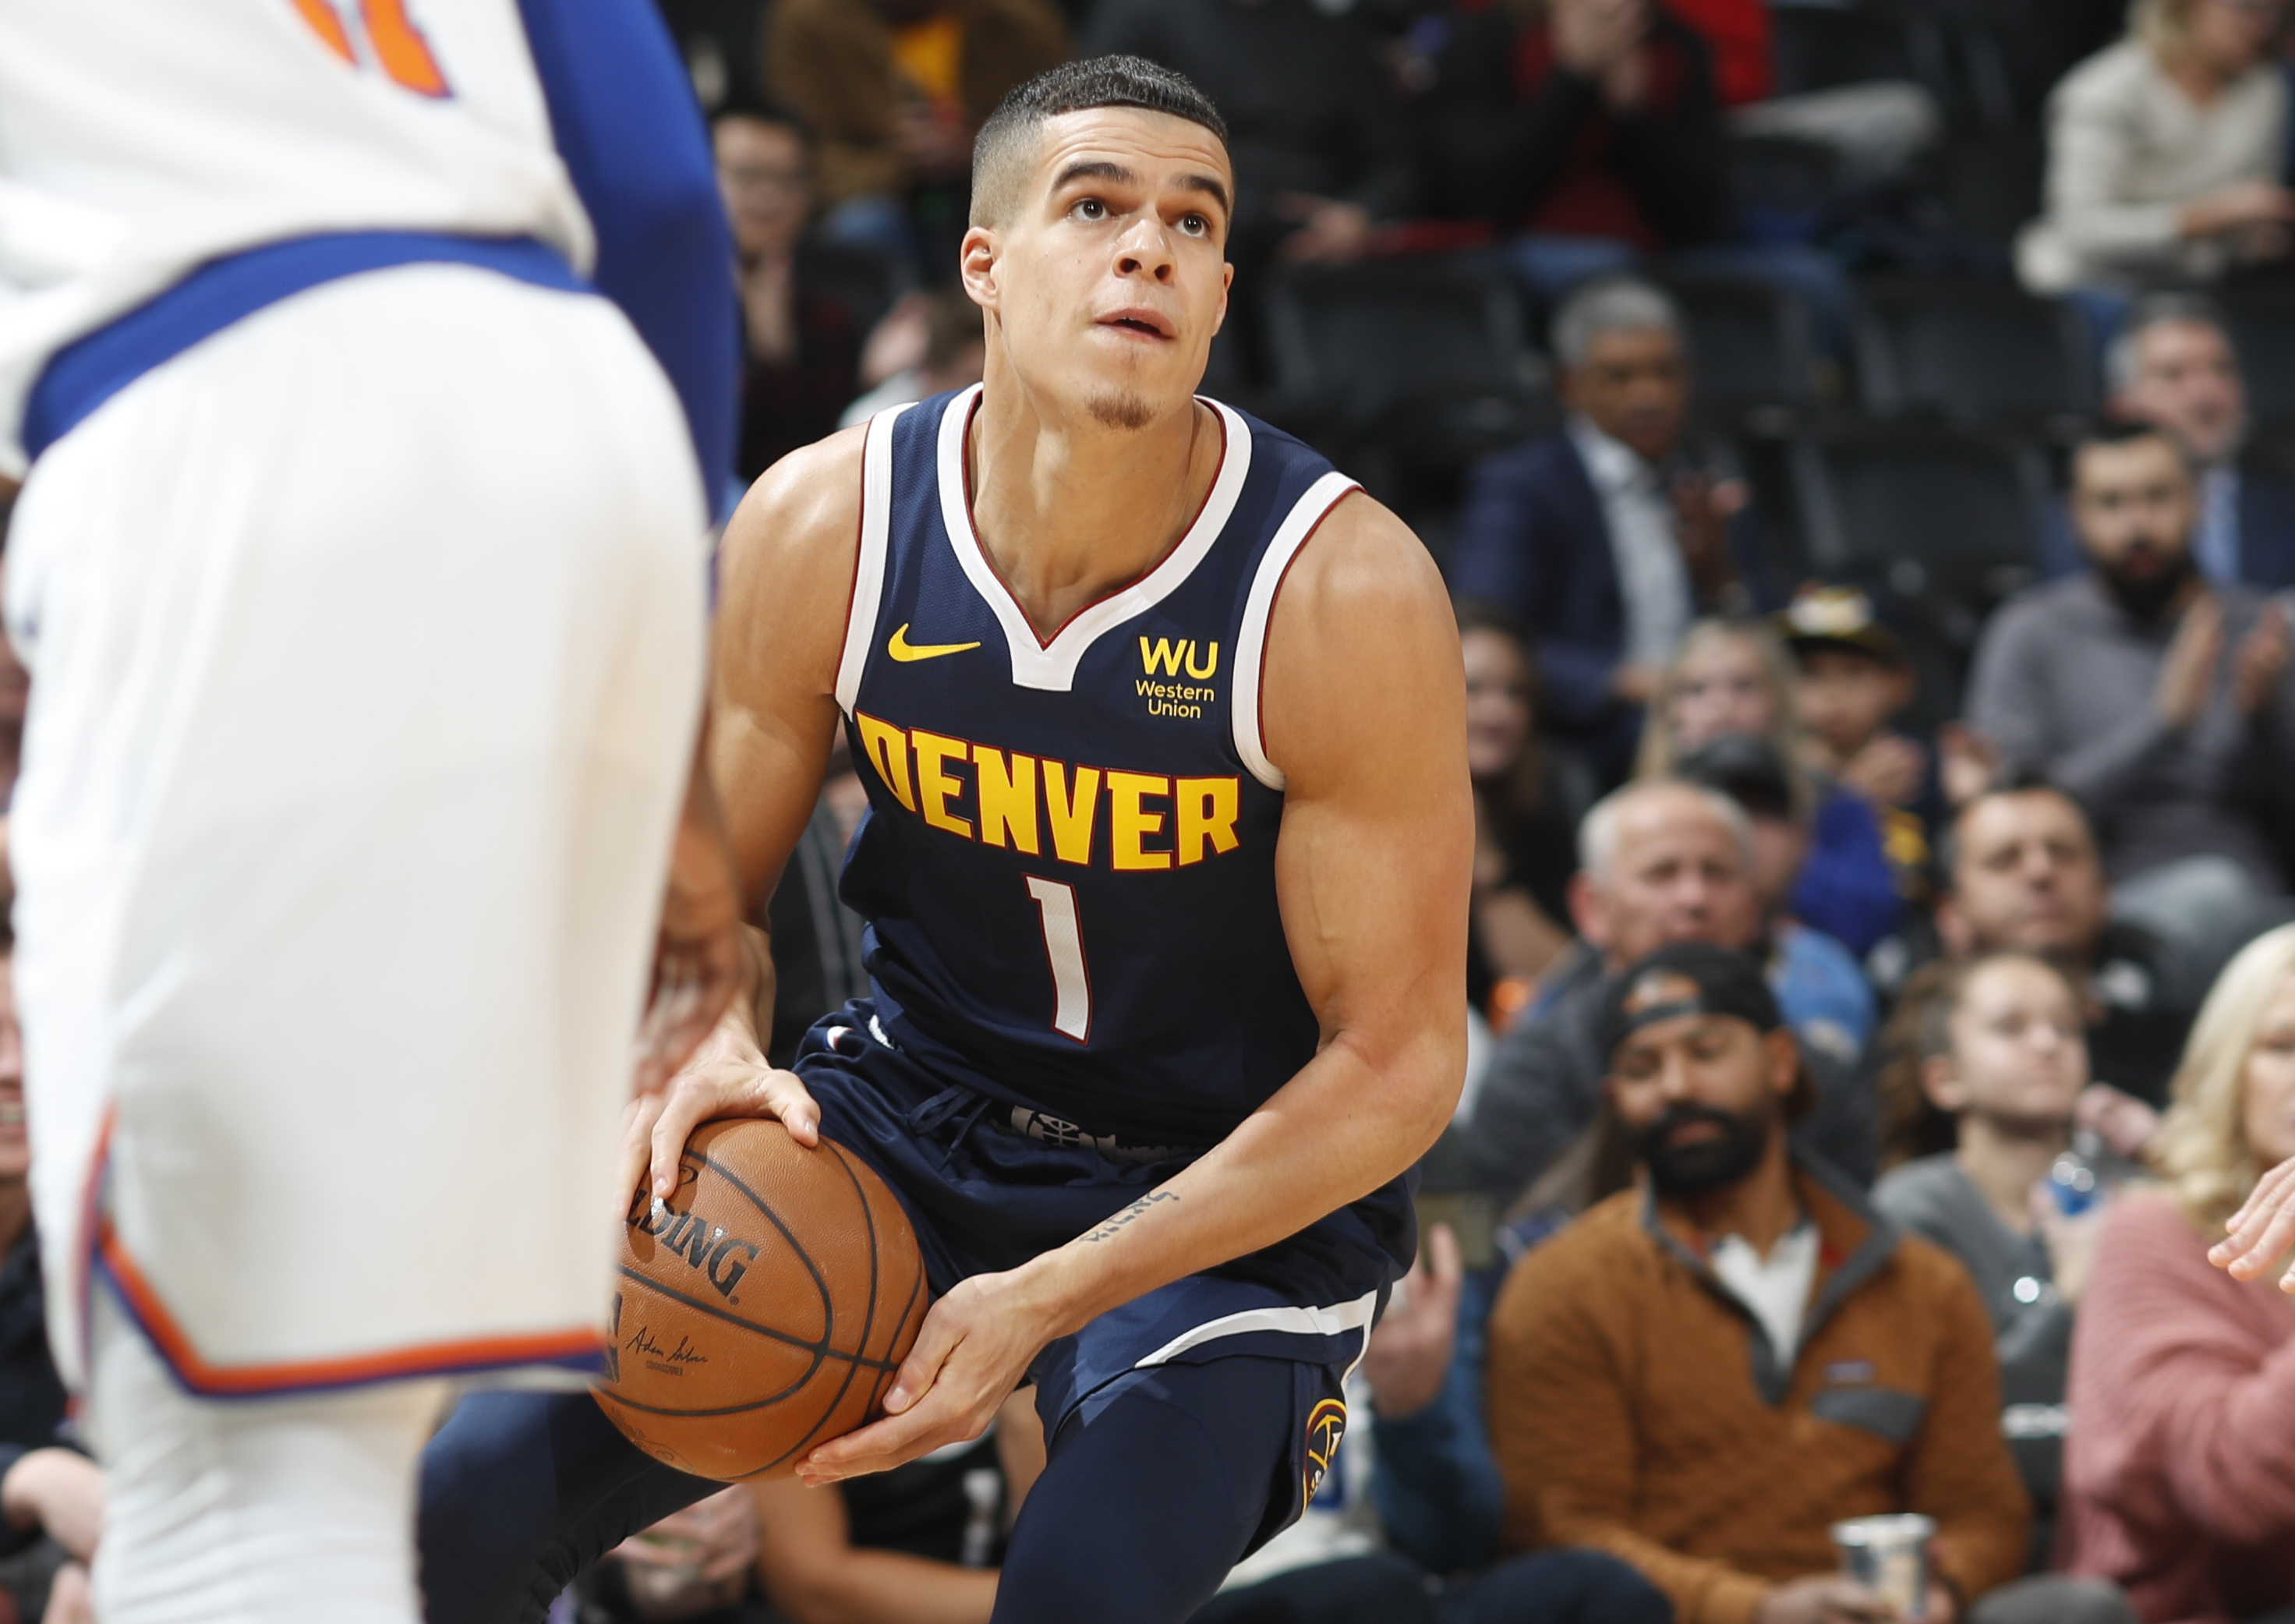 Nuggets' Michael Porter Jr. shows out in Orlando debut: I'm here to “help this team win a championship”